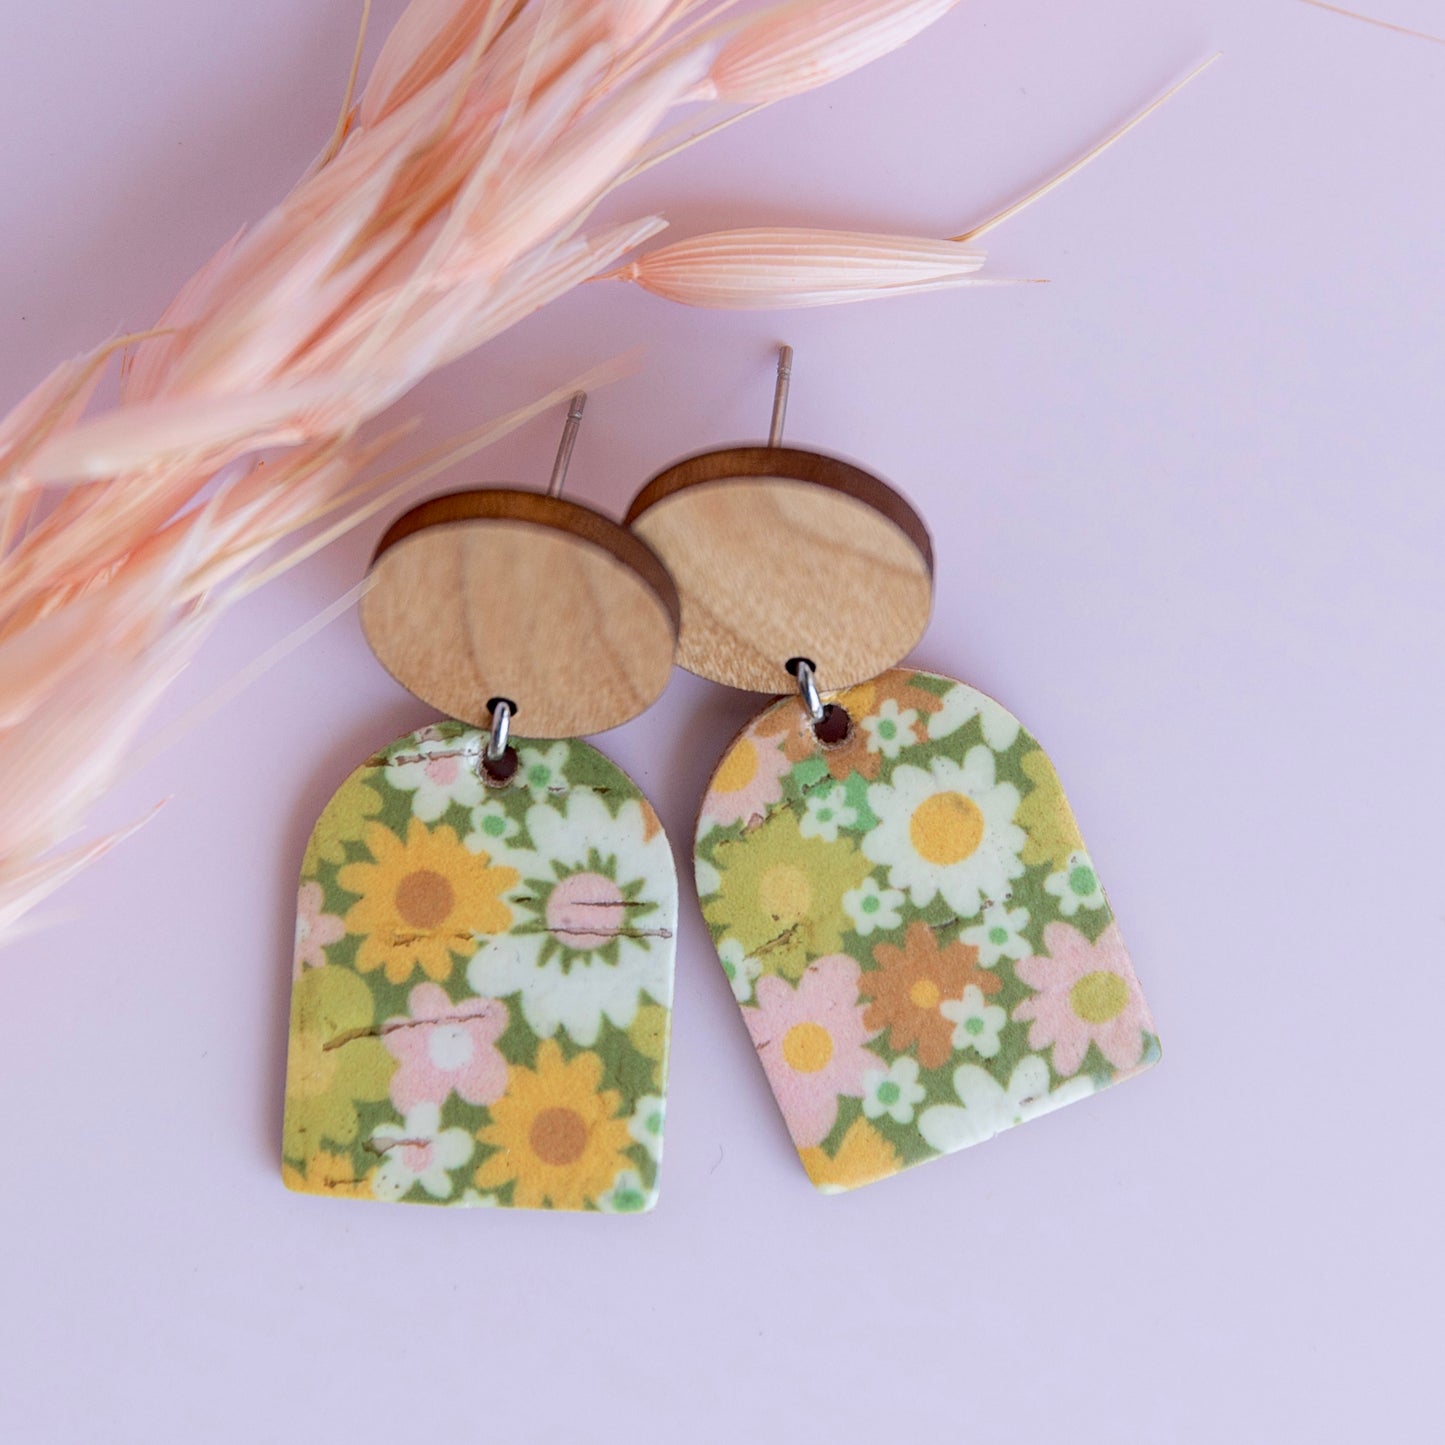 THE ARCH DANGLE in 60’s Retro Daisy/ Lightweight Wood + Leather Statement Earrings